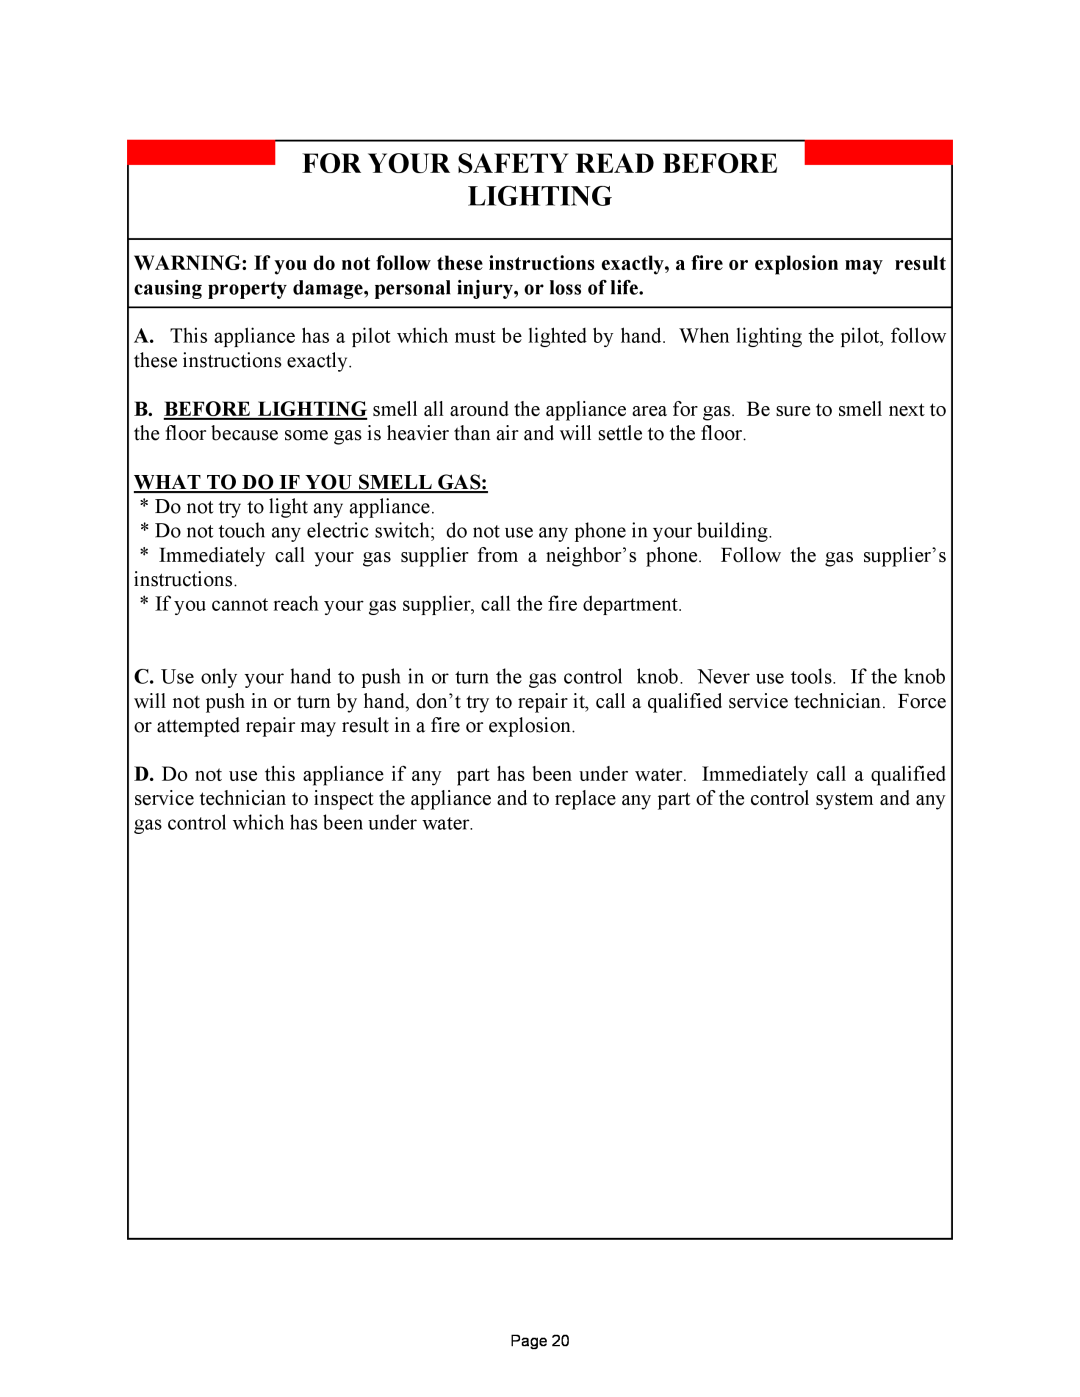 New Buck Corporation DV1000 manual For Your Safety Read Before Lighting, What To Do If You Smell Gas 